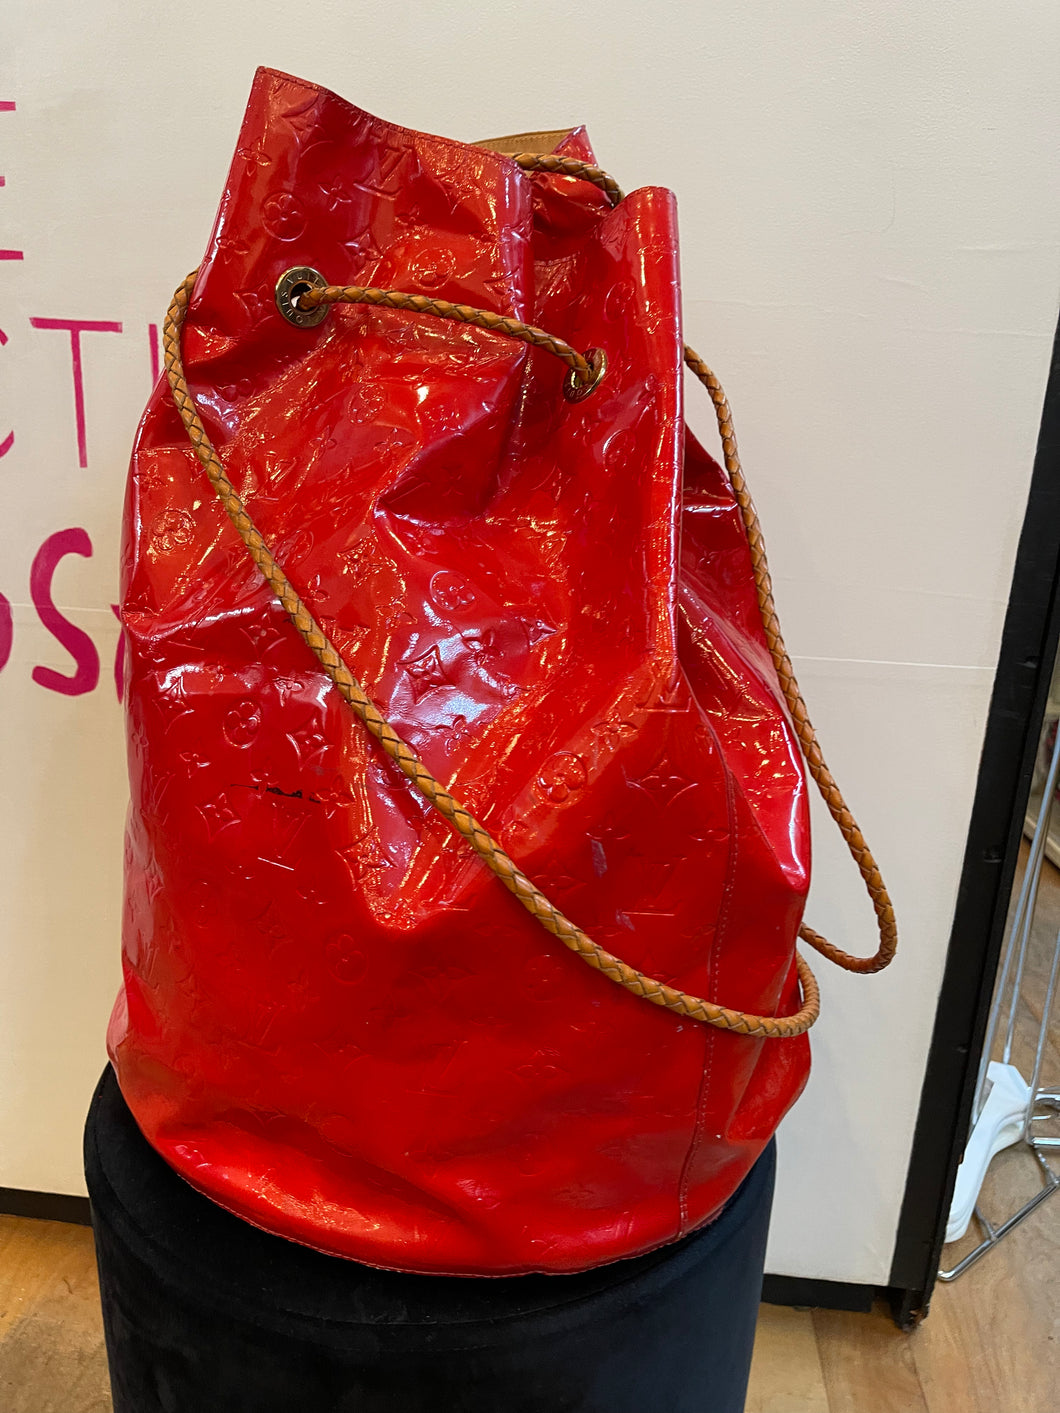 louis vuitton red backpack